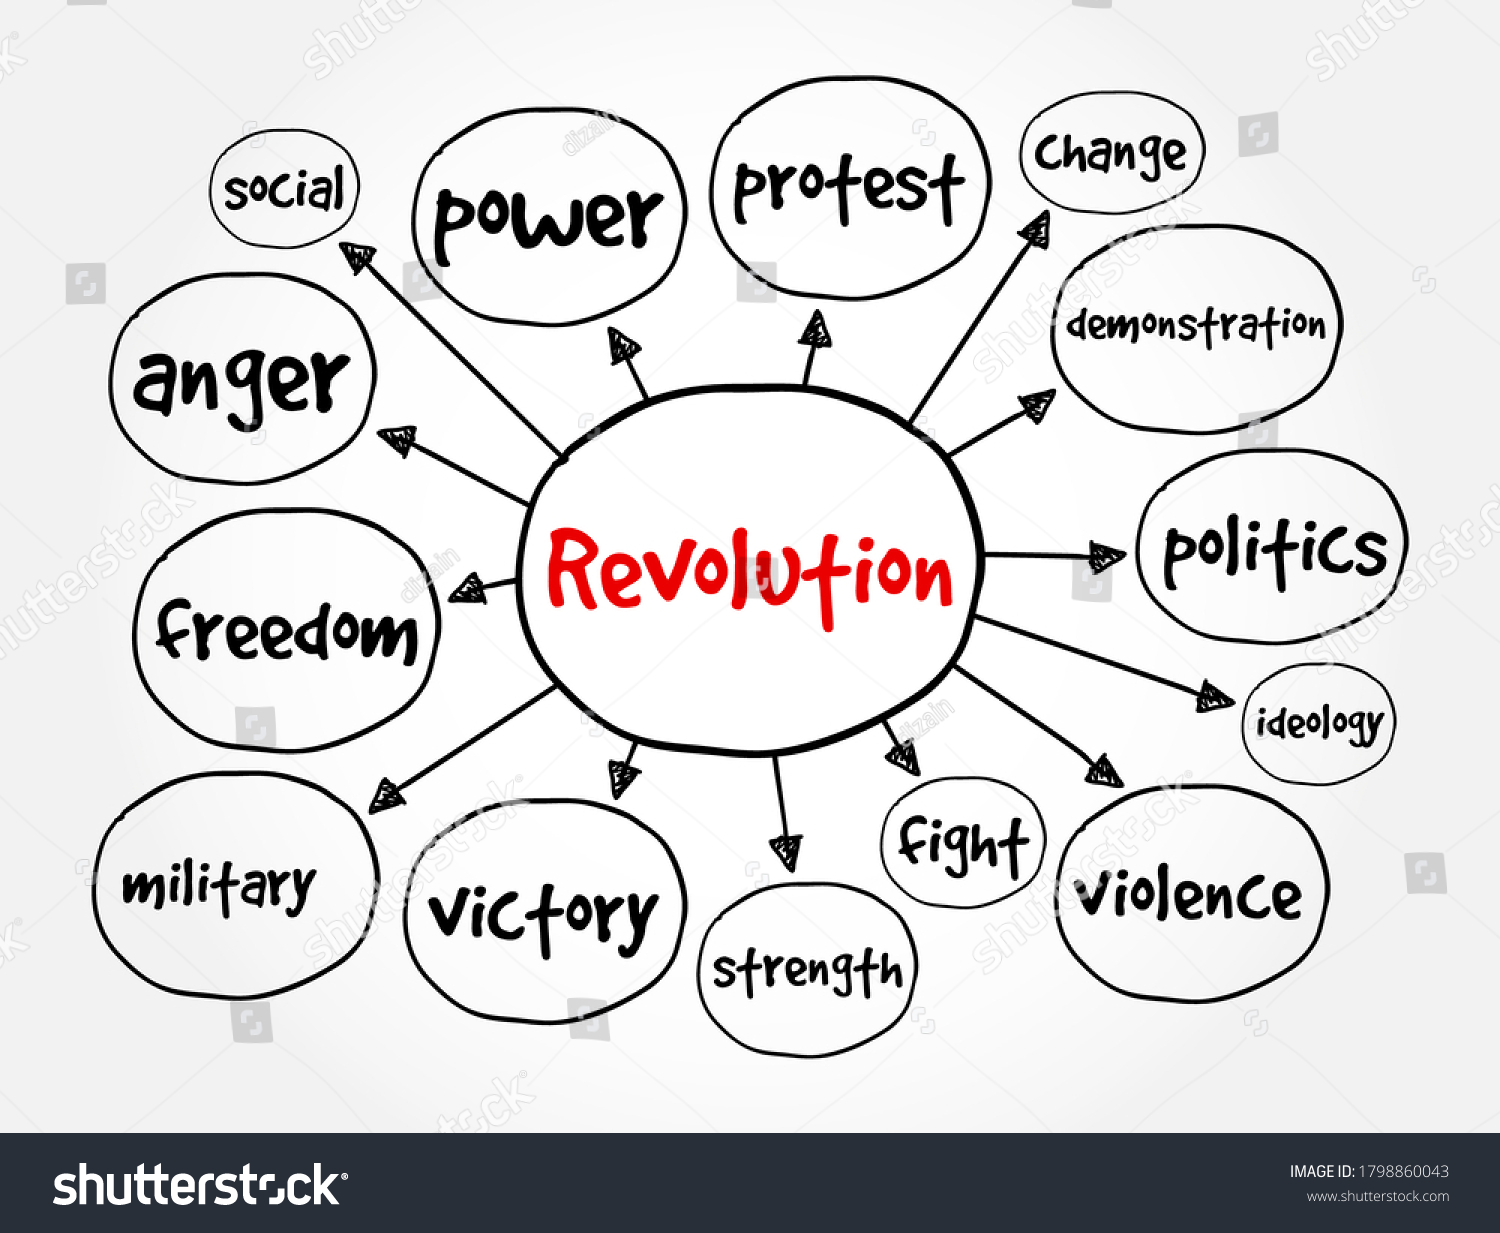 Revolution Mind Map Concept Presentations Reports Stock Vector Royalty Free 1798860043 